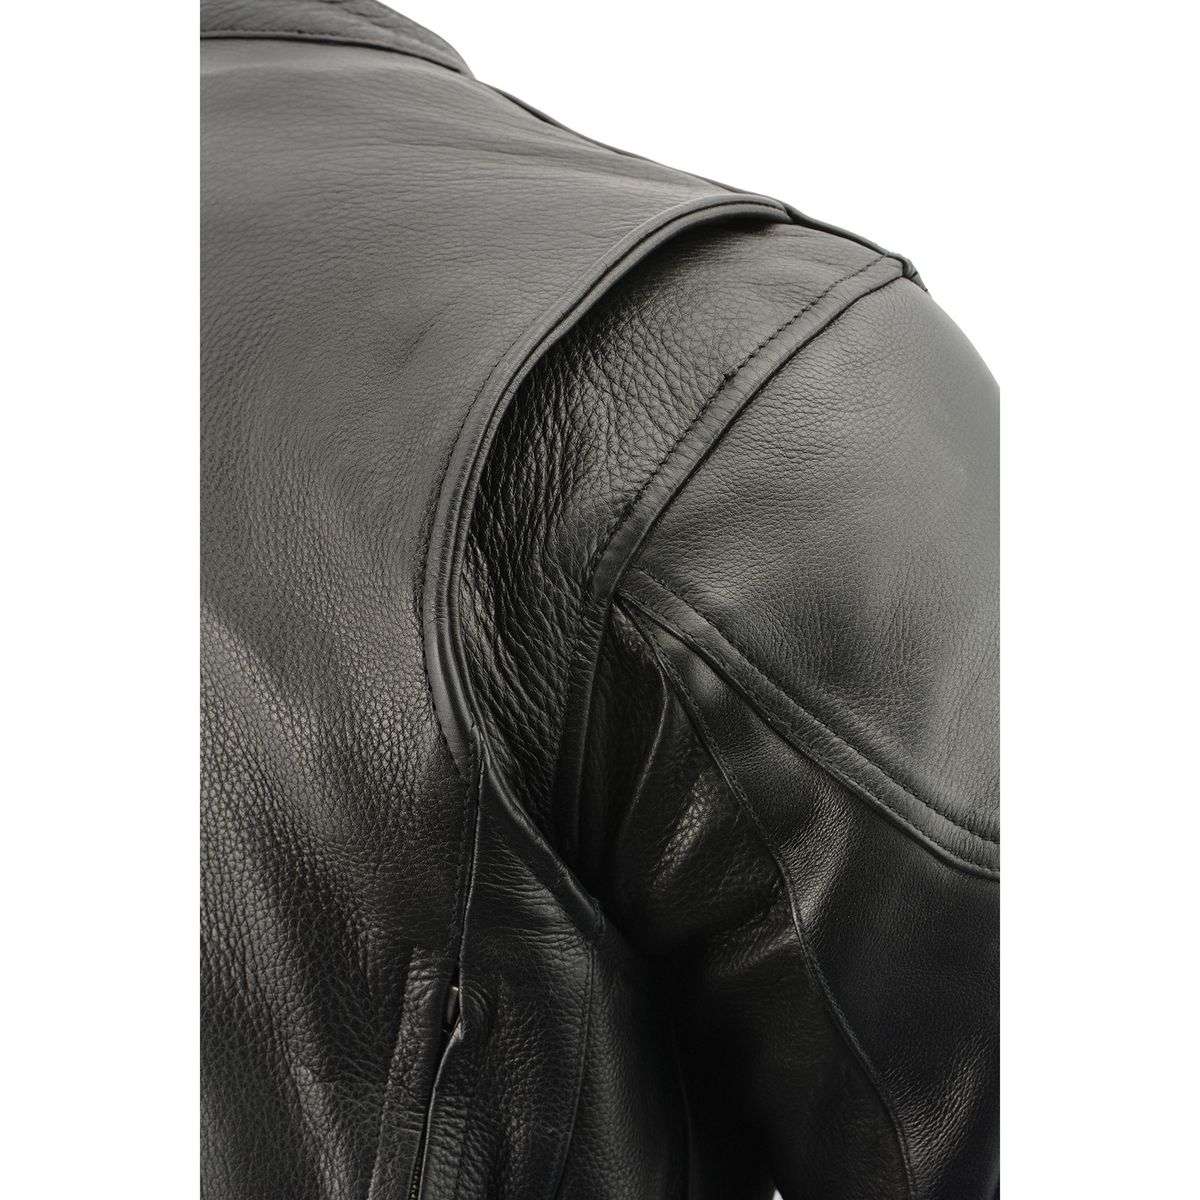 Milwaukee Leather ML1010 Men's Side Lace Vented Black Leather Scooter Jacket